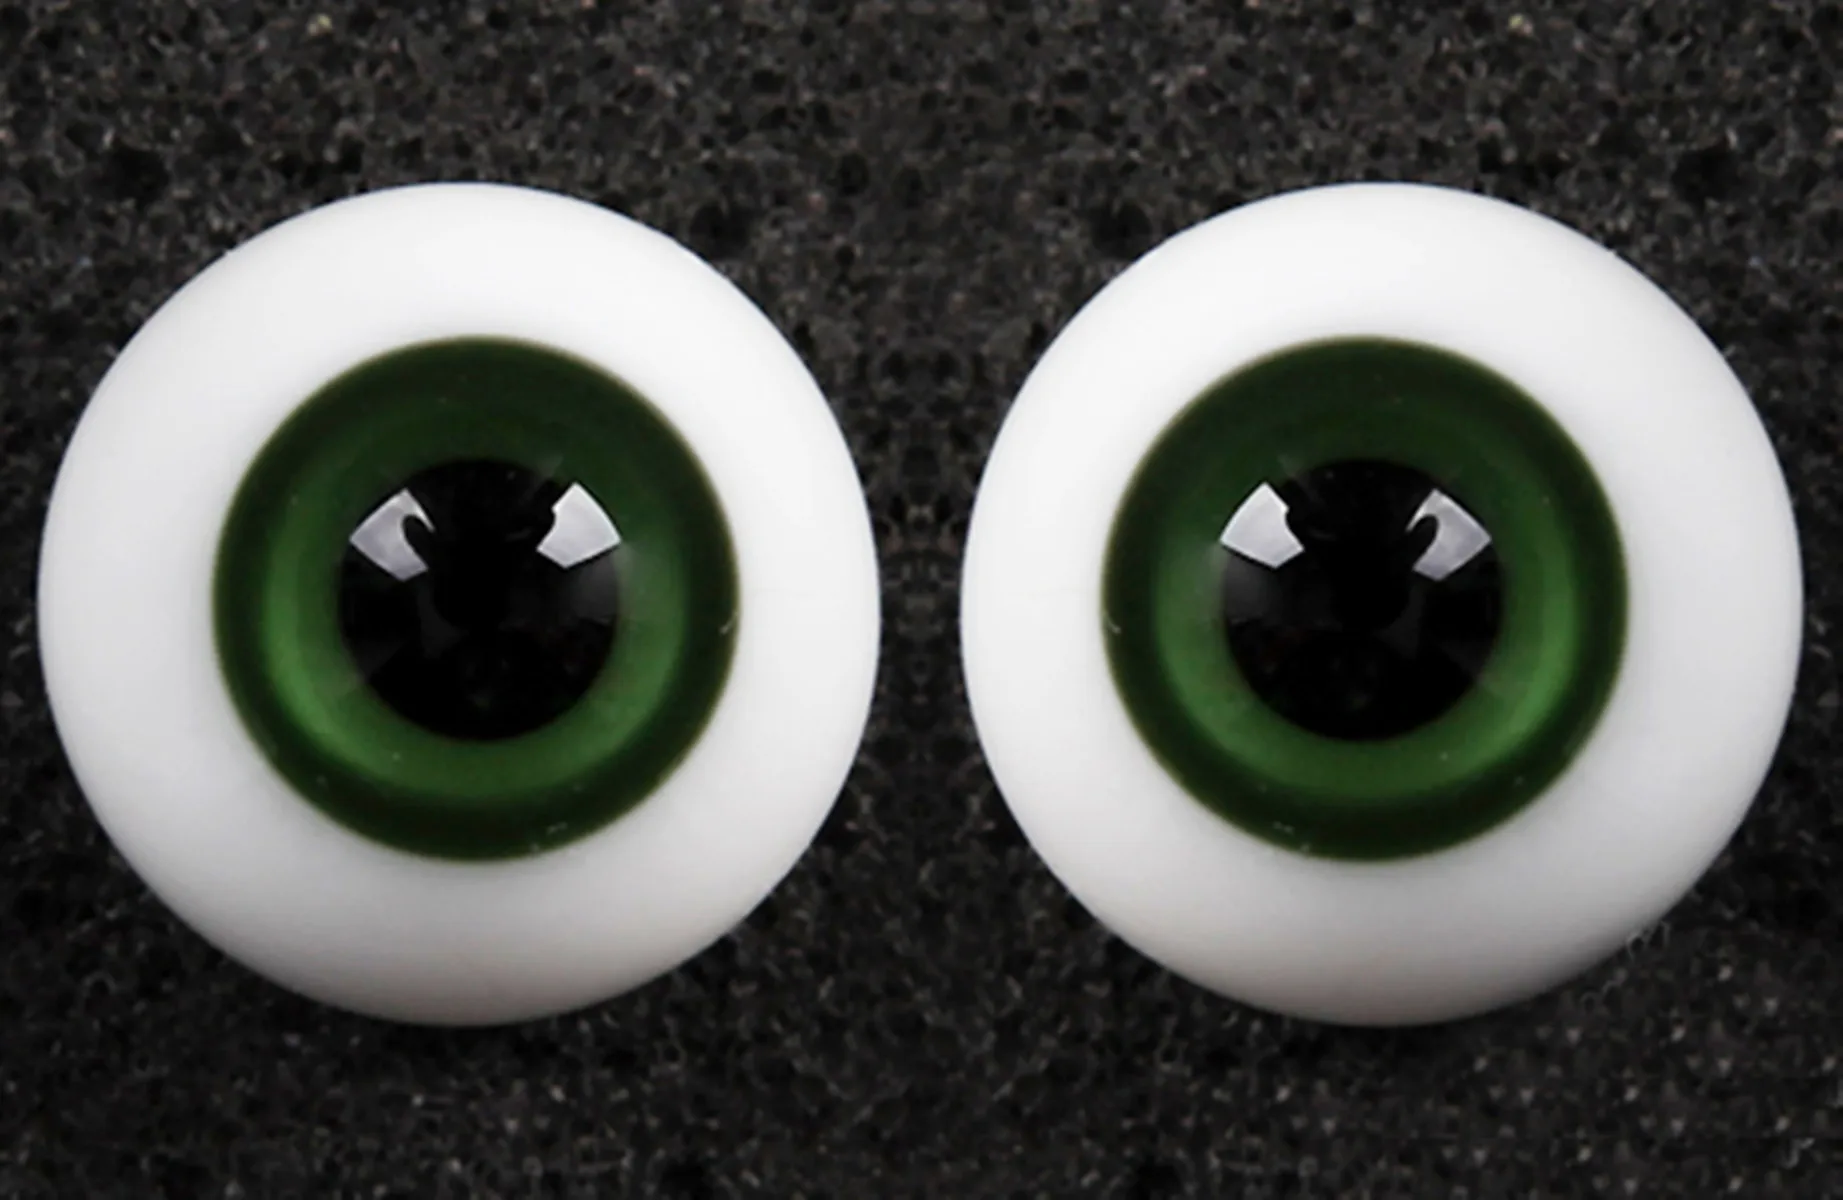 1/3 1/6 1/4 1/8 1/12 Bjd eyeball A product glass eyeball multicolor multi-size purchase doll can b 10 mm 12 mm 14 mm 16 mm 18 mm